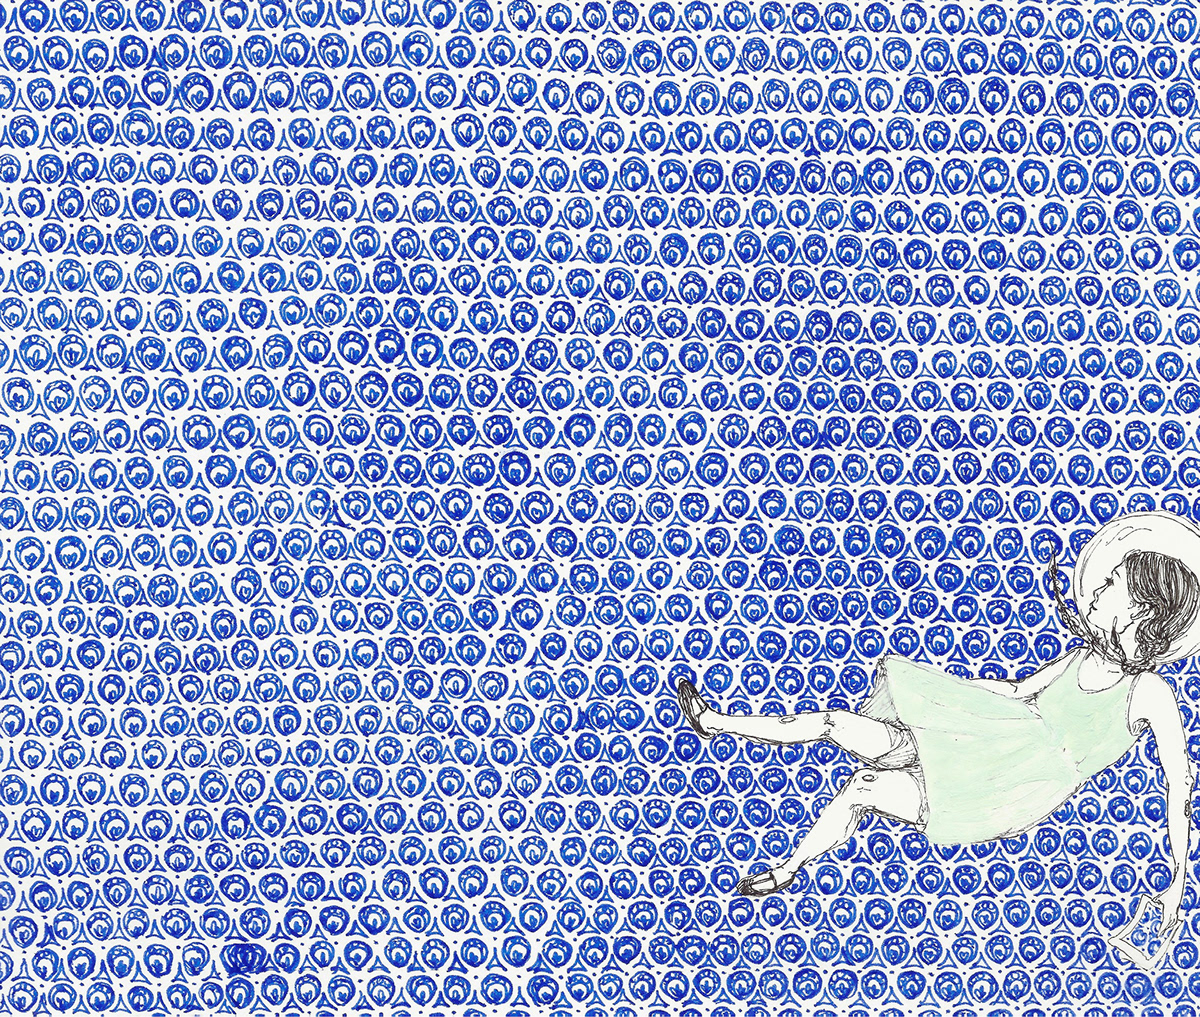 Patterns Blue and White Sara K Dunn Visual Narrative series pattern Personal Evolution Finding Comfort underwater people delft pattern surreal change of comfort